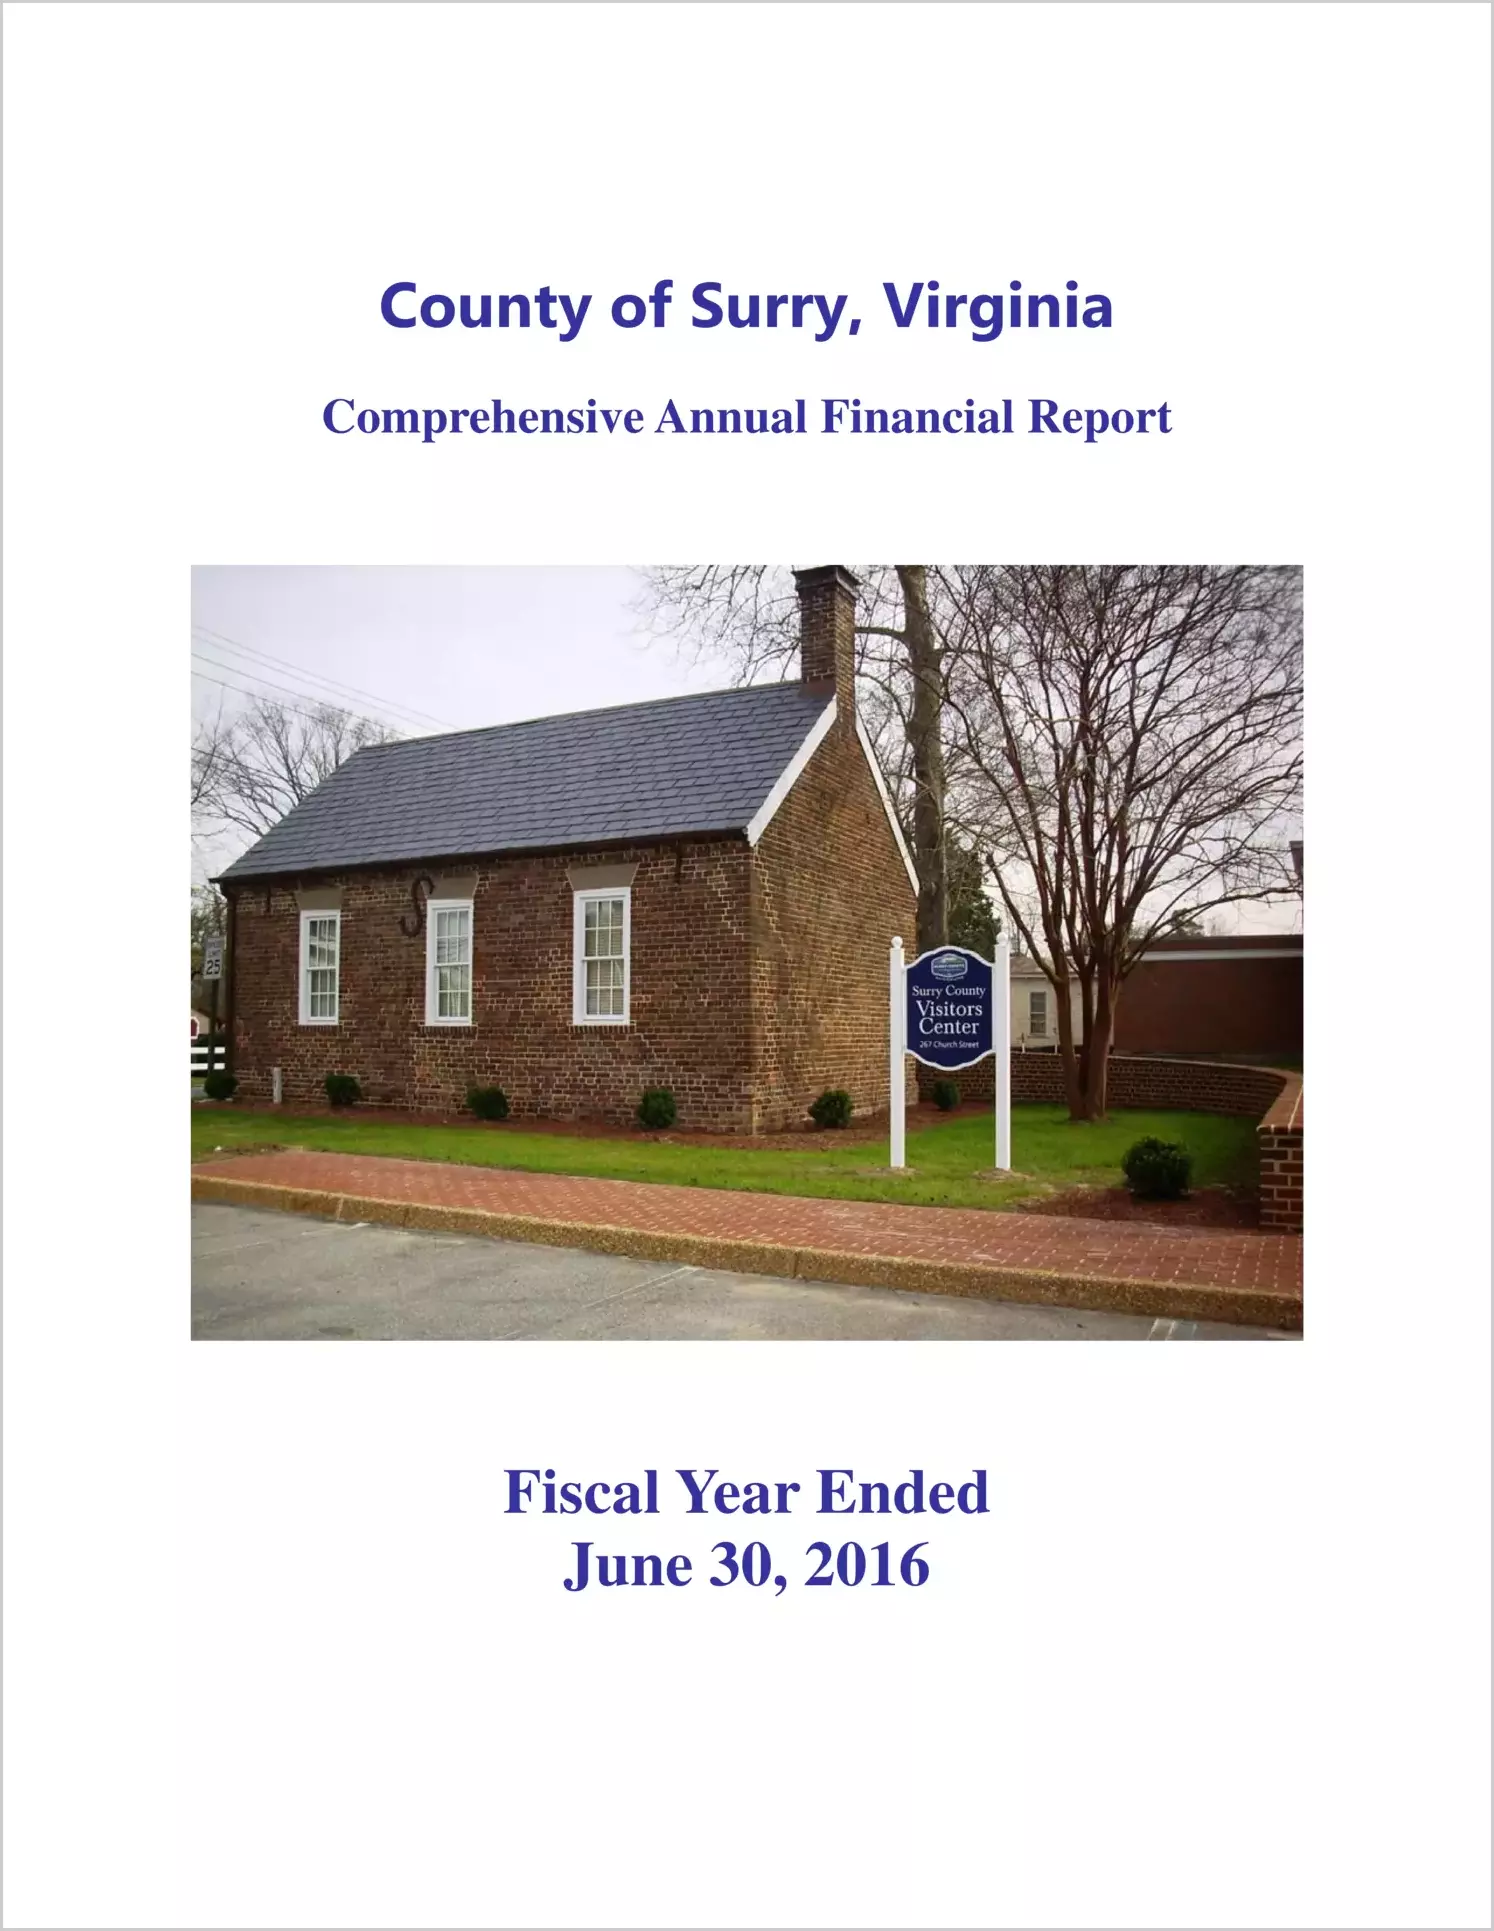 2016 Annual Financial Report for County of Surry